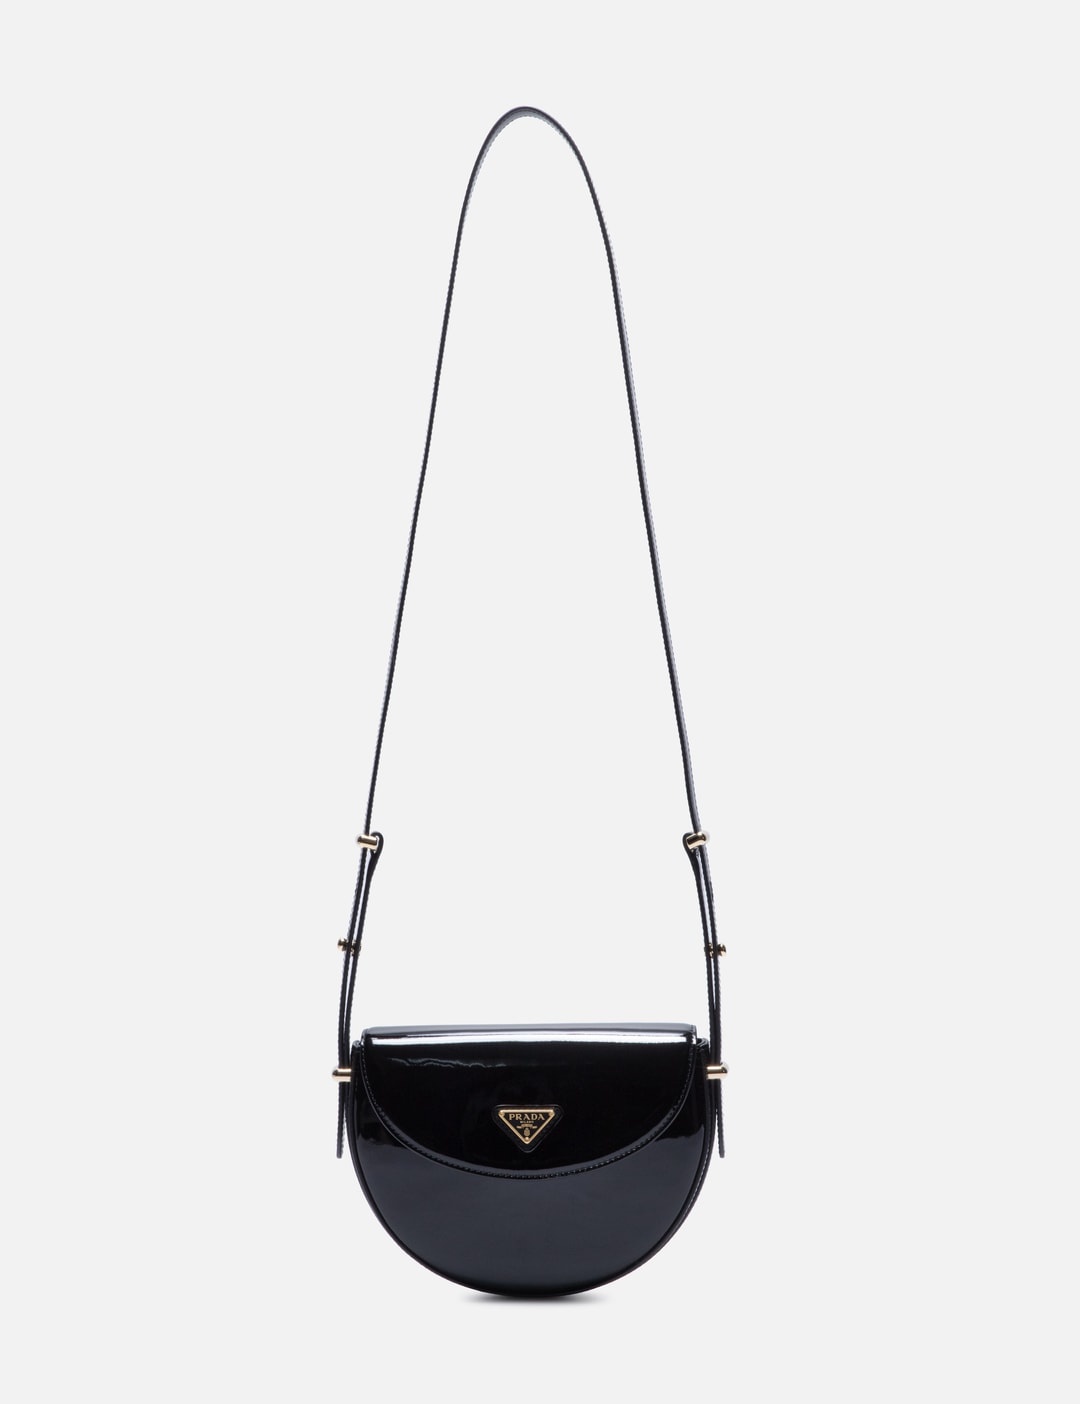 PATENT LEATHER BAG - 2